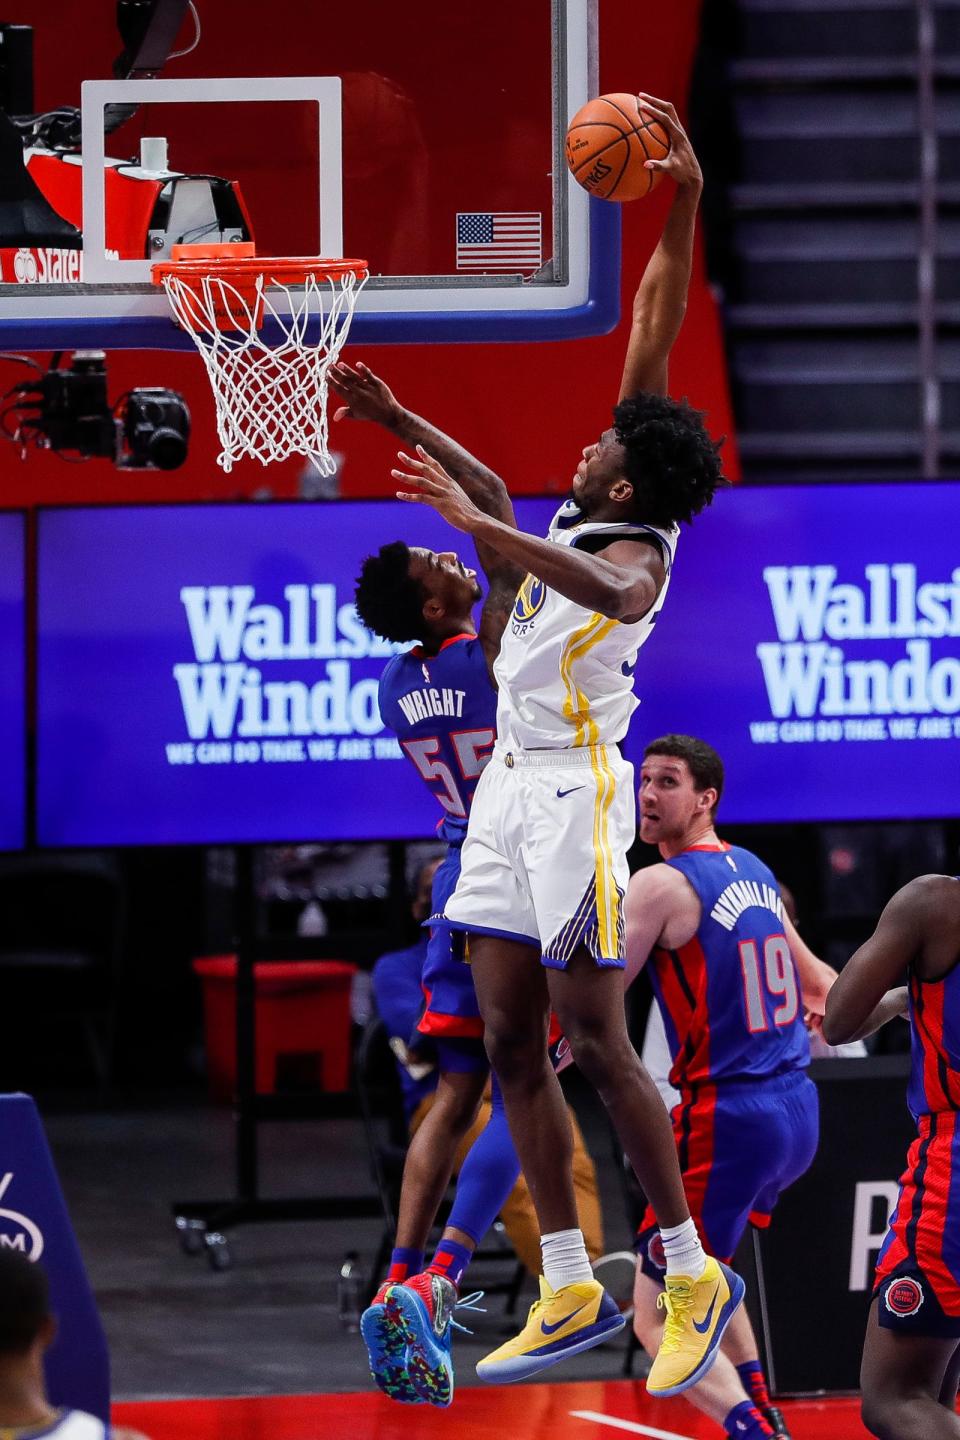 Golden State Warriors center James Wiseman dunks against Detroit Pistons guard Delon Wright during the second half at Little Caesars Arena, Tuesday, Dec. 29, 2020.